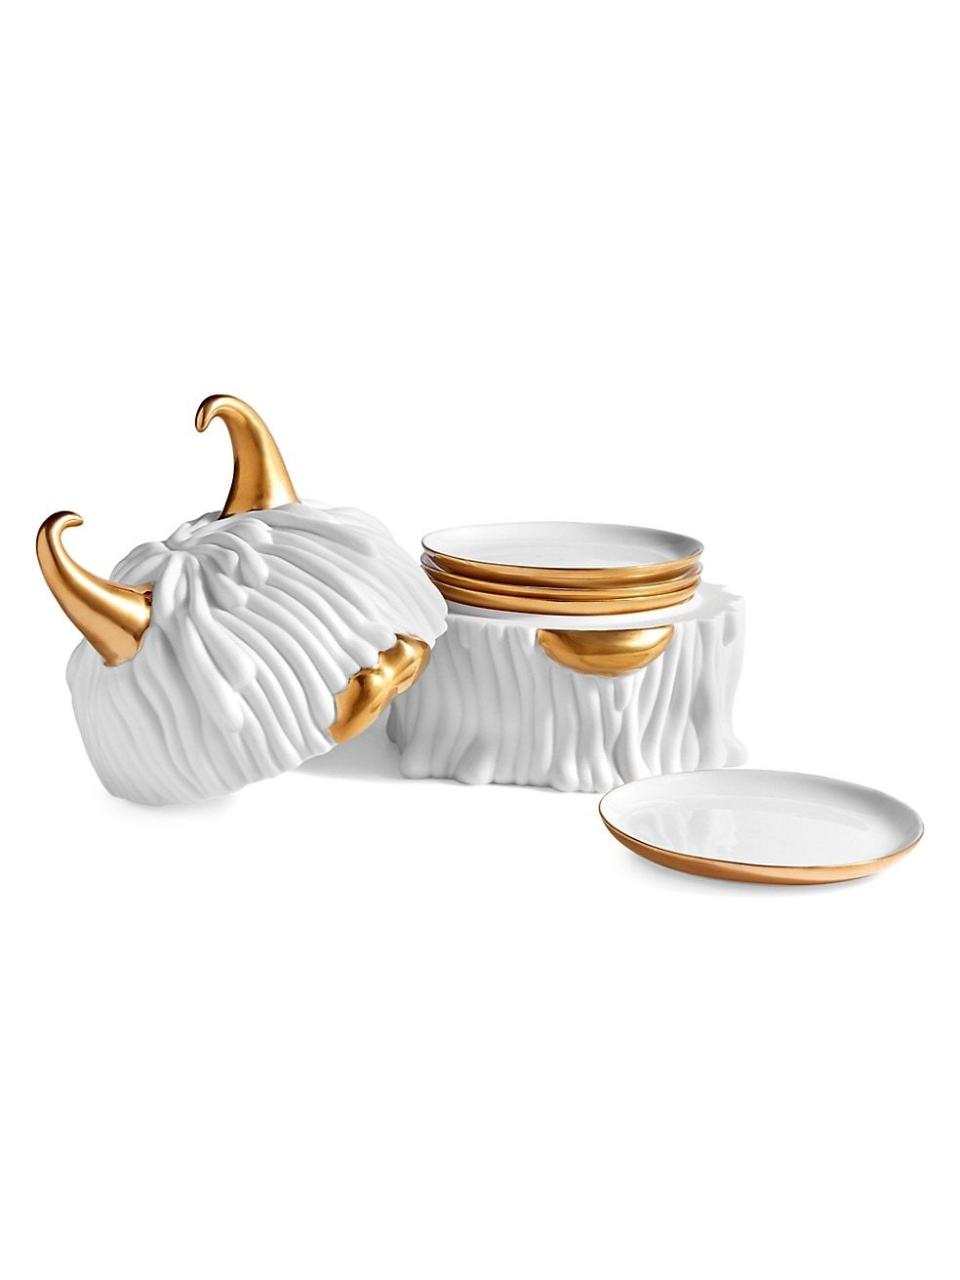 3) Haas Gold and Porcelain Plate Set